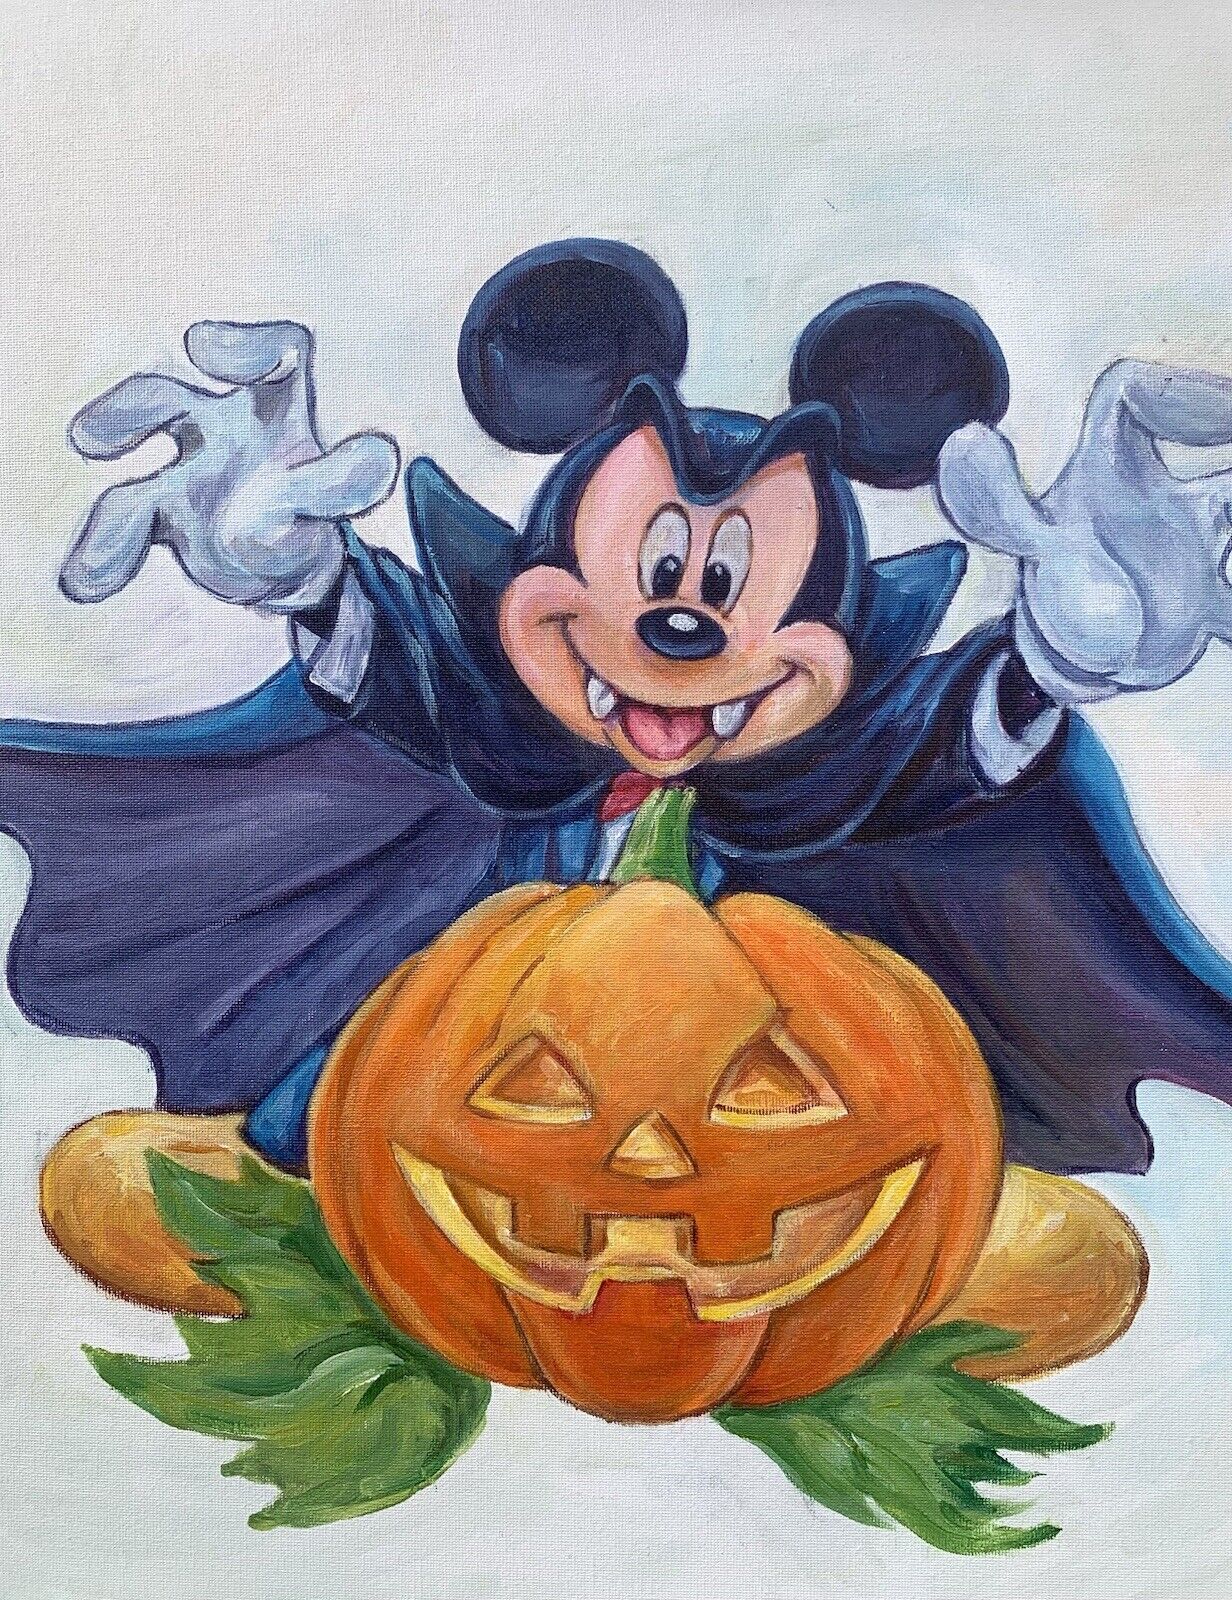 Art Original Mickey Mouse Halloween painting 16*20 inches Canvas acrylic Disney